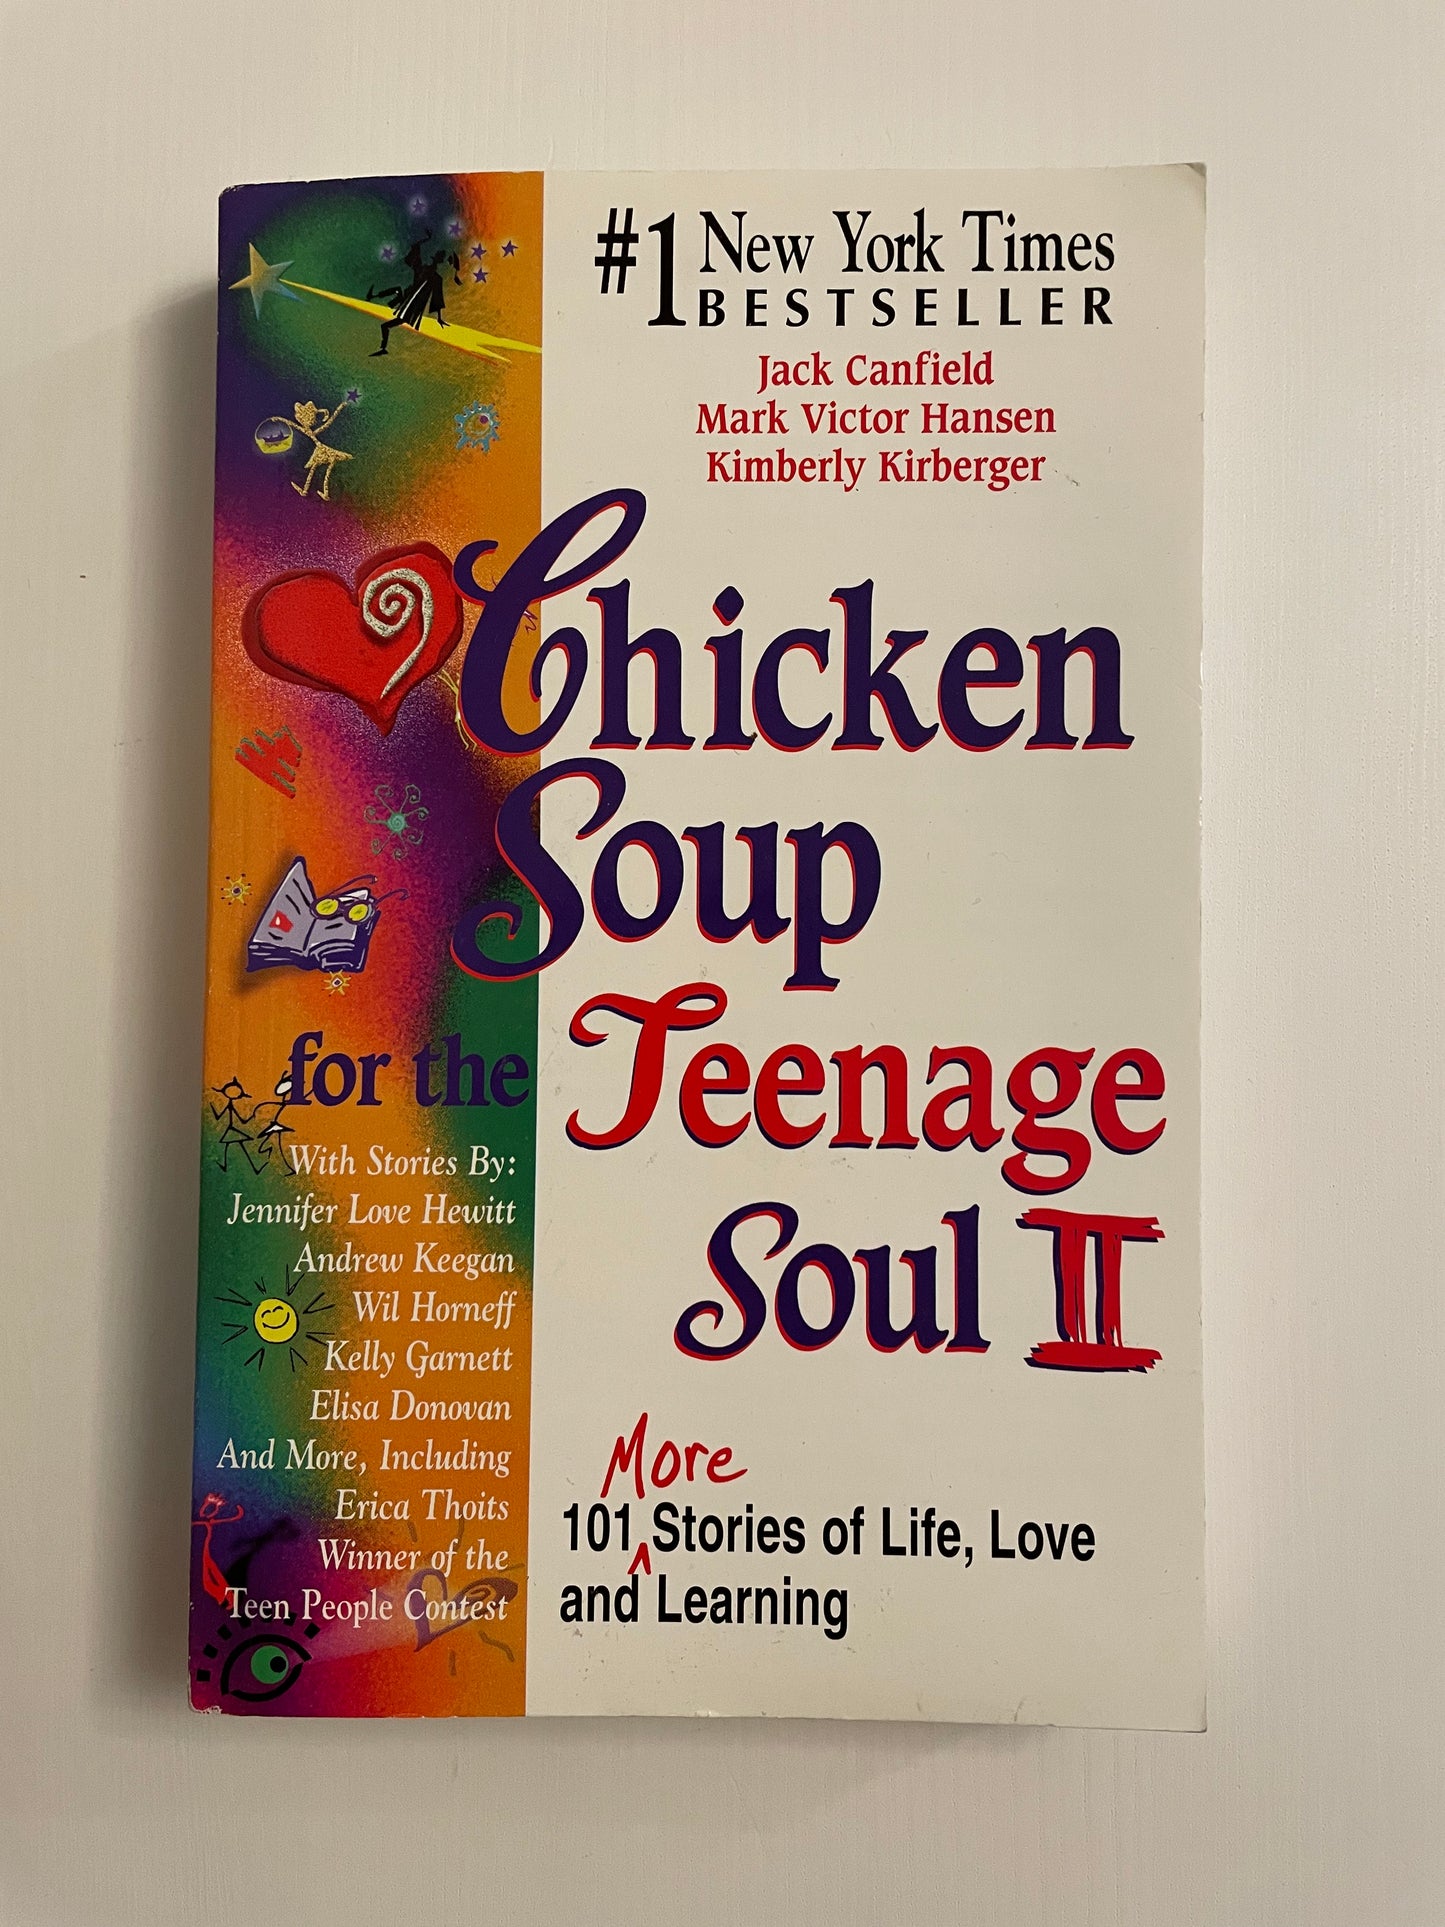 Chicken Soup for the Teenage Soul 2 / 12-17 years